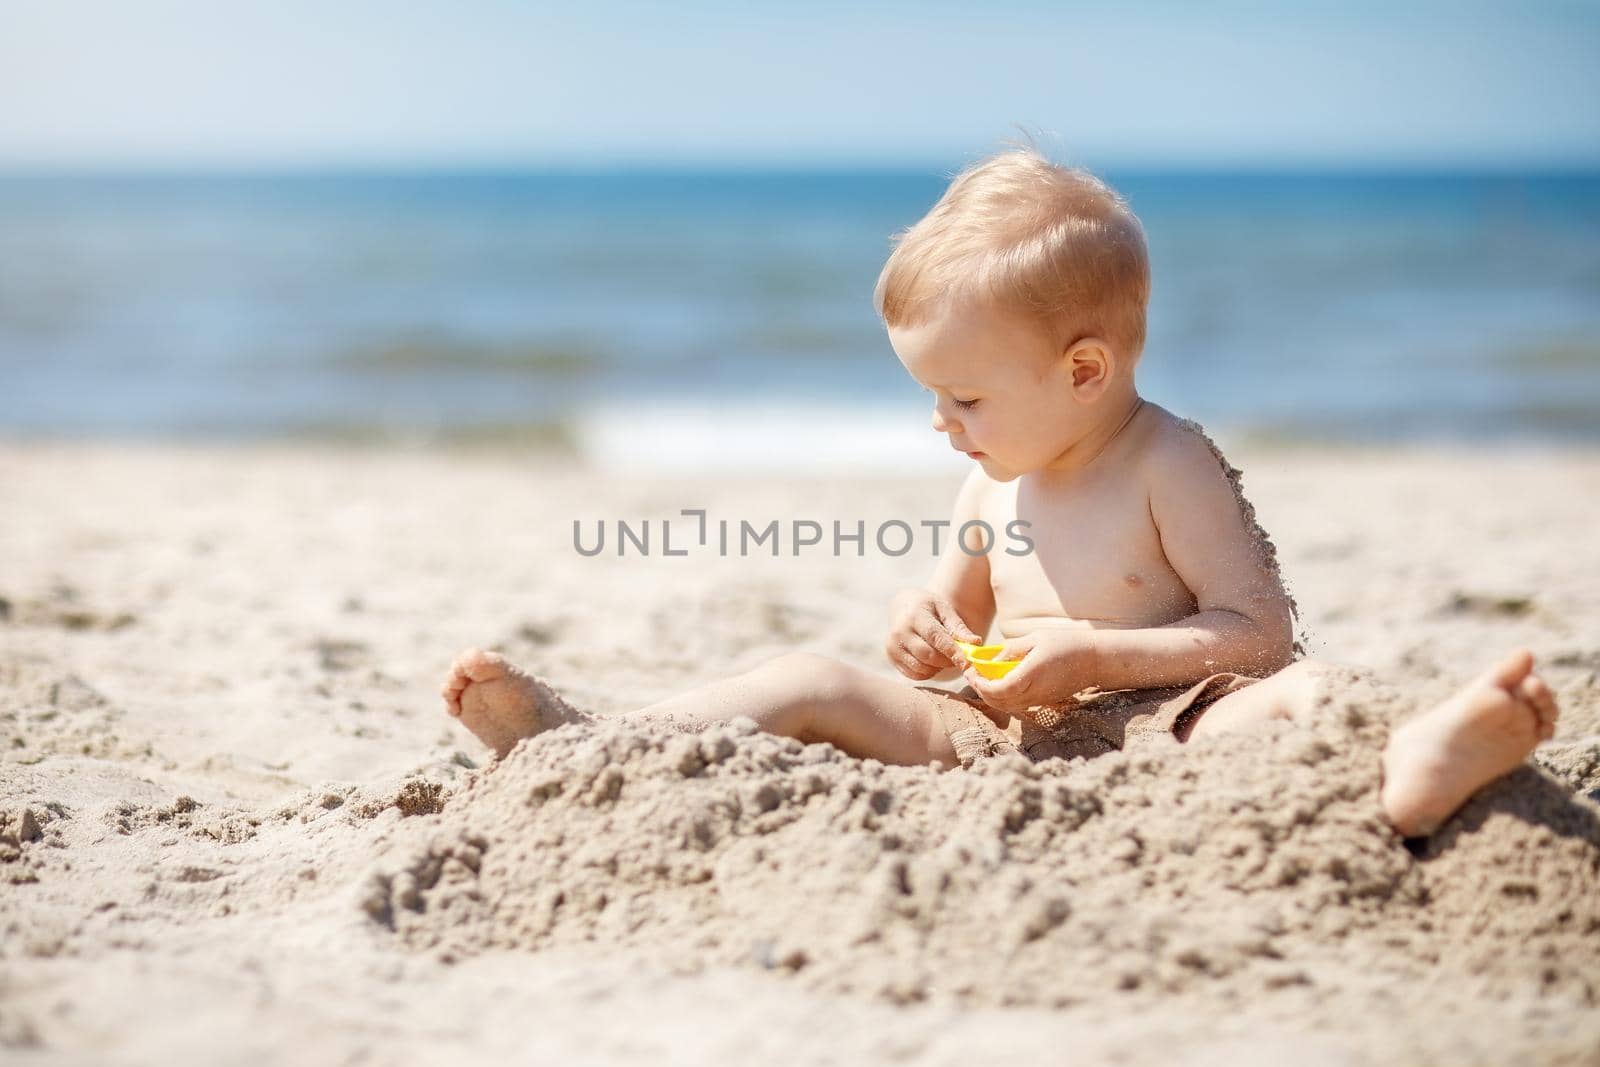 Child playing on Baltic sea beach. Little boy digging sand at sea shore. Family summer vacation. Kids play with water and sand toys. Travel with young children.